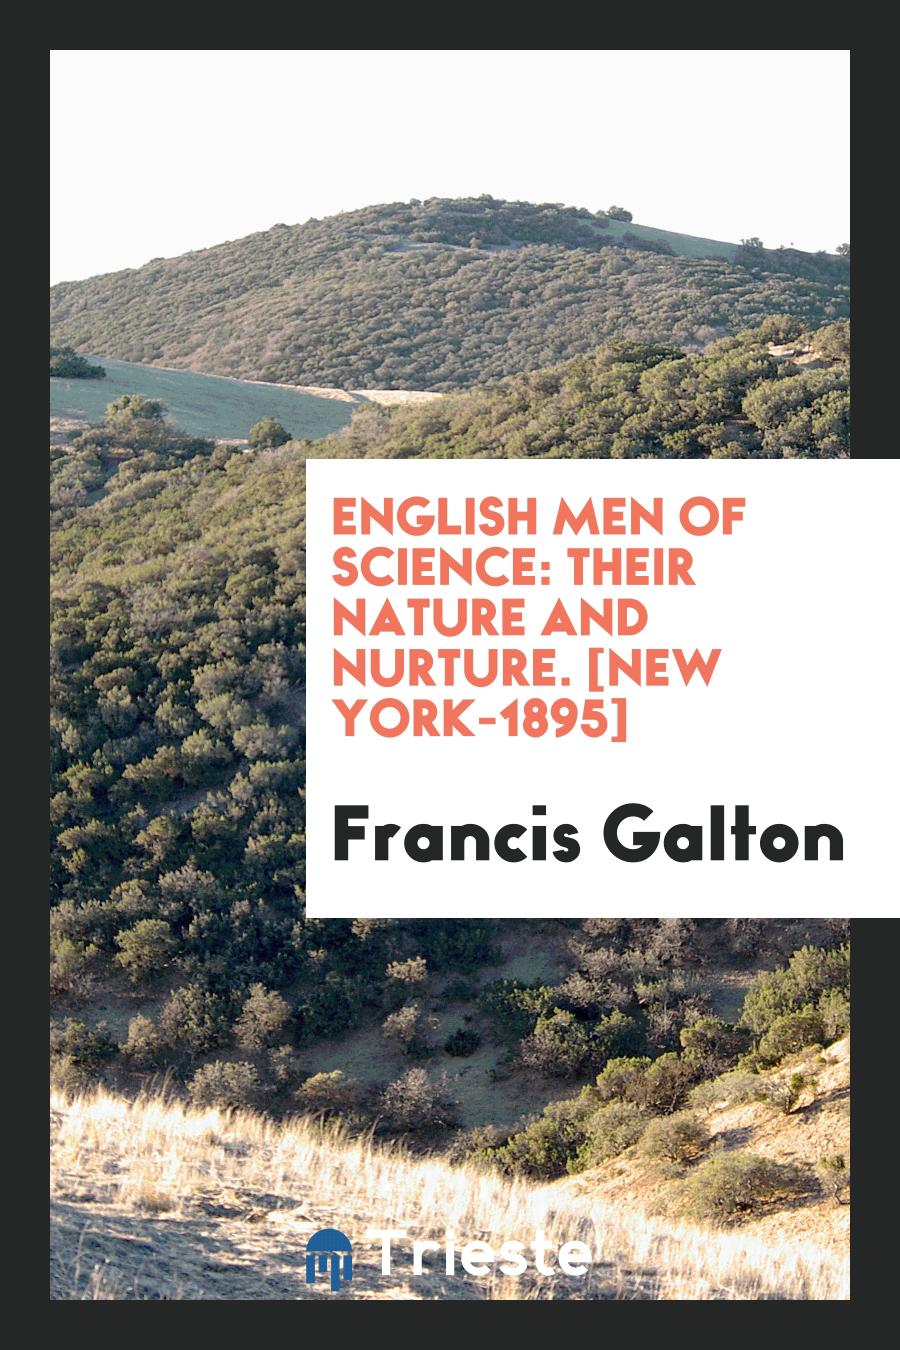 Francis Galton - English Men of Science: Their Nature and Nurture. [New York-1895]